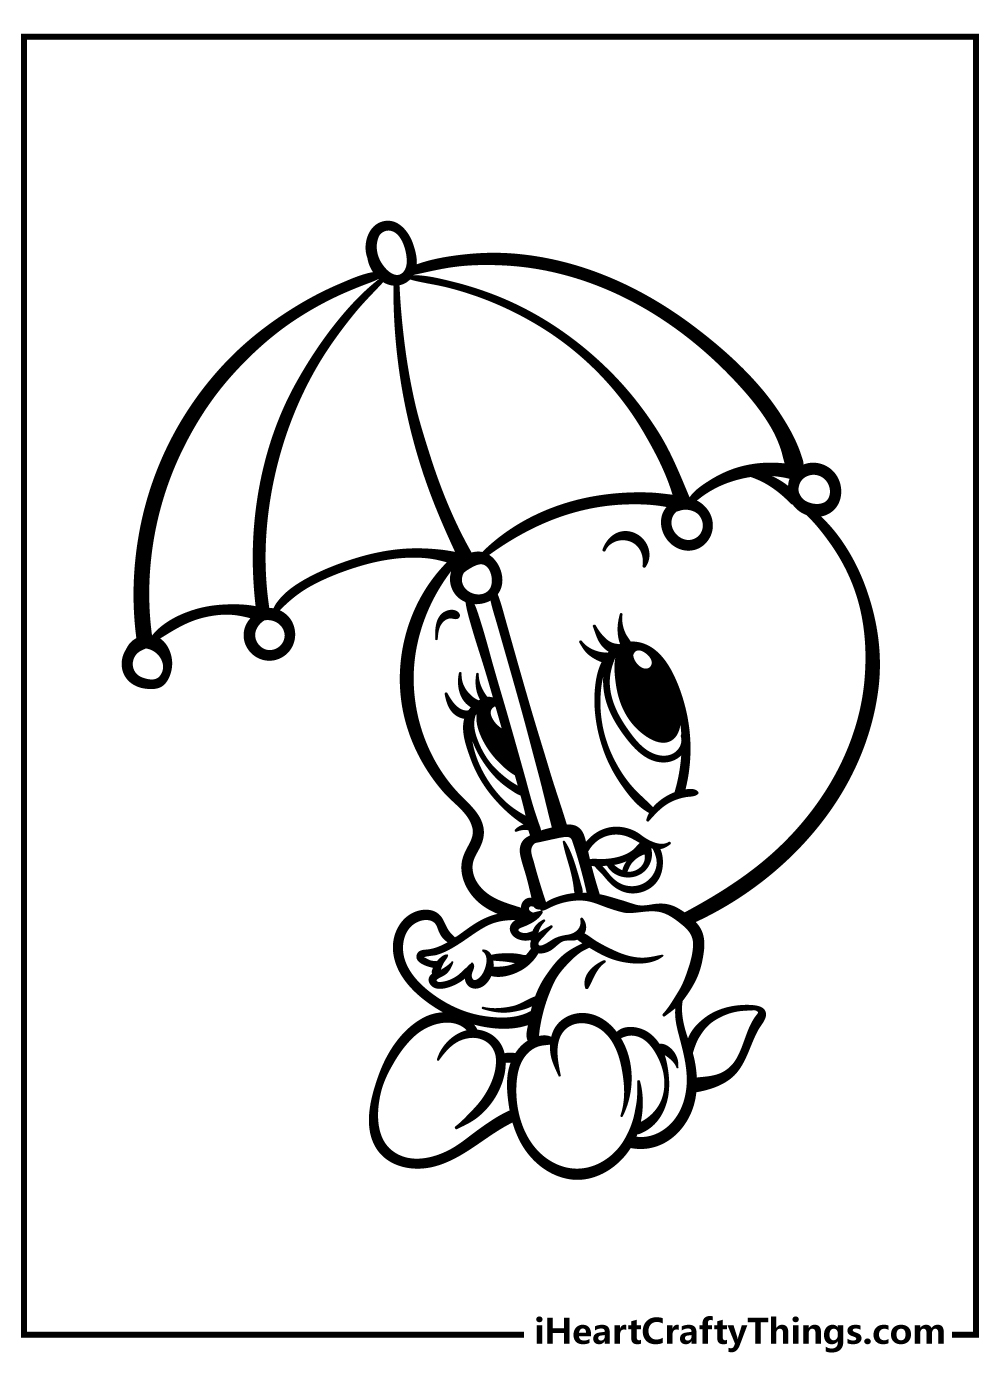 Looney Tunes Coloring Pages free pdf download